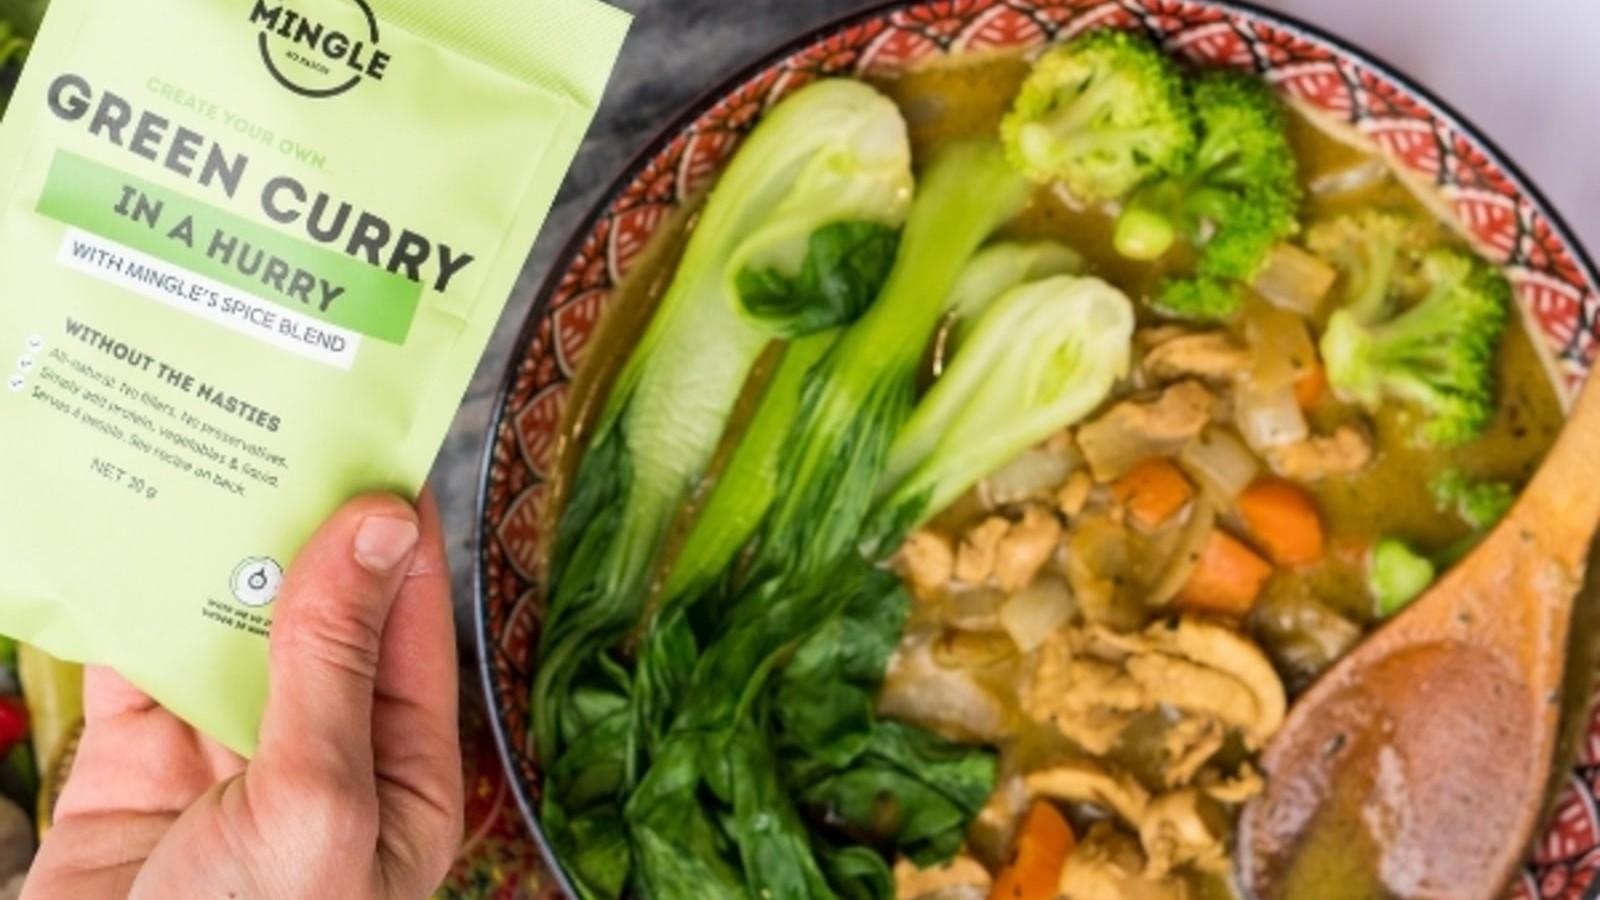 Image of Mingle's Green Curry In A Hurry